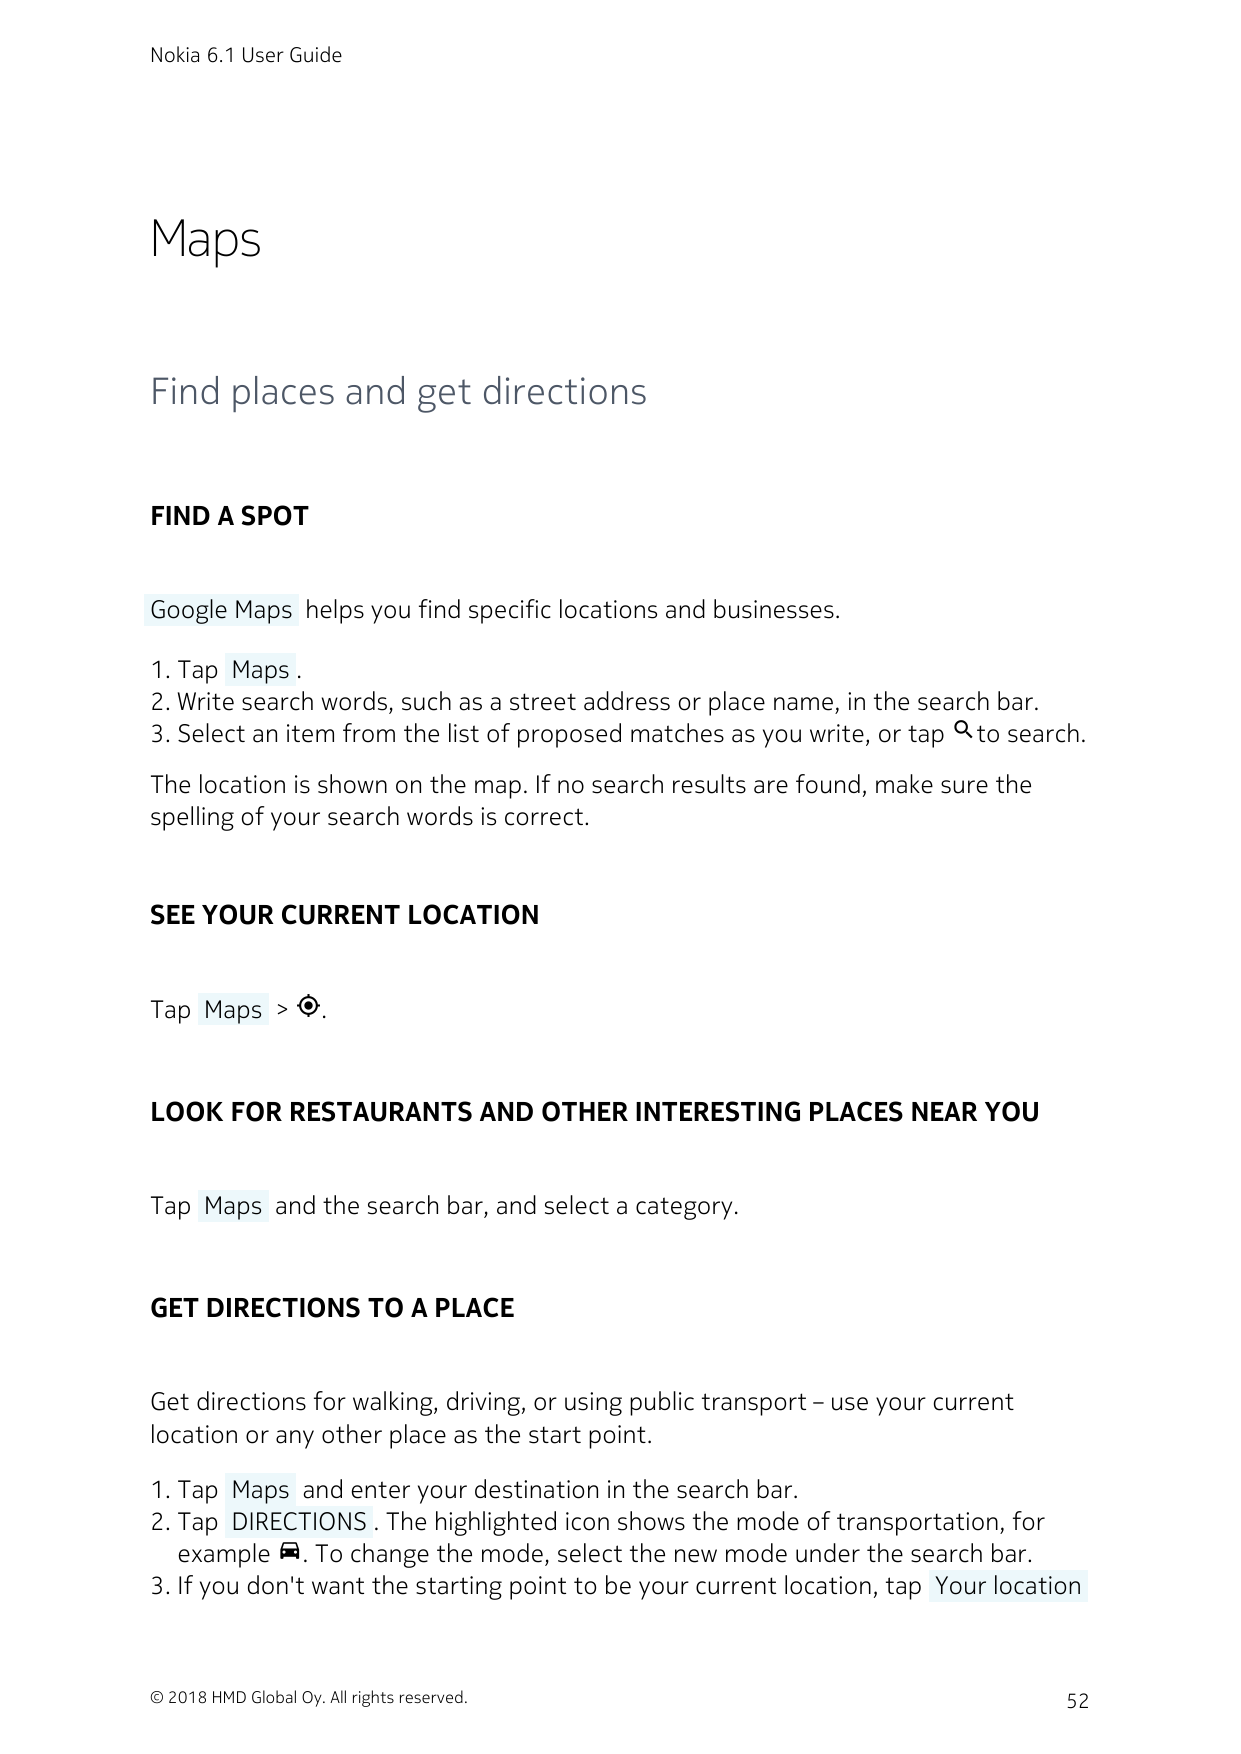 Nokia 6.1 User GuideMapsFind places and get directionsFIND A SPOT Google Maps  helps you find specific locations and businesses.